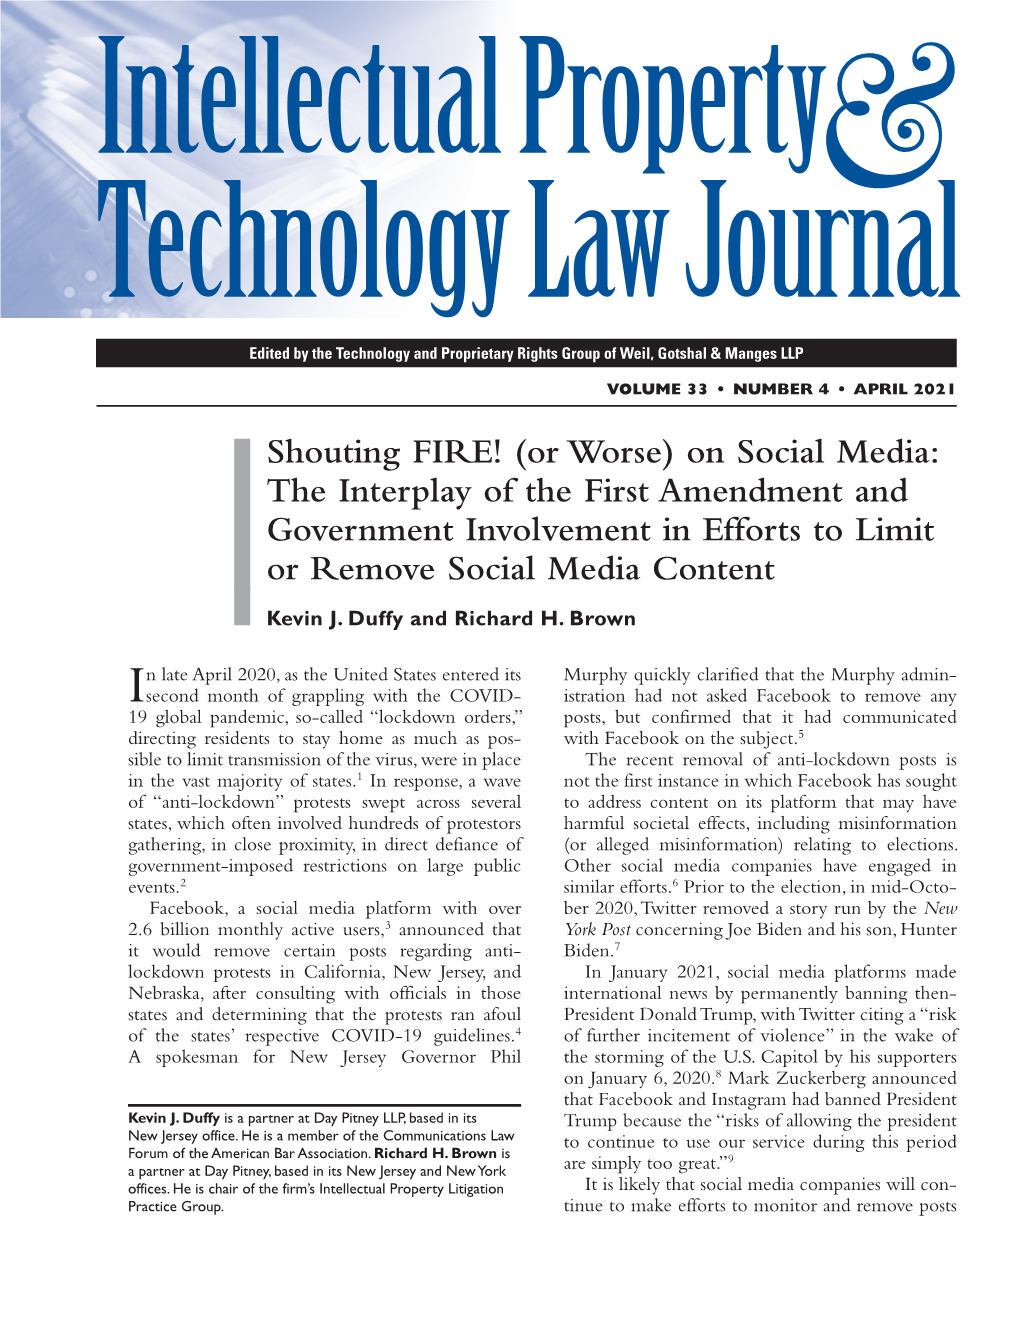 On Social Media: the Interplay of the First Amendment and Government Involvement in Efforts to Limit Or Remove Social Media Content